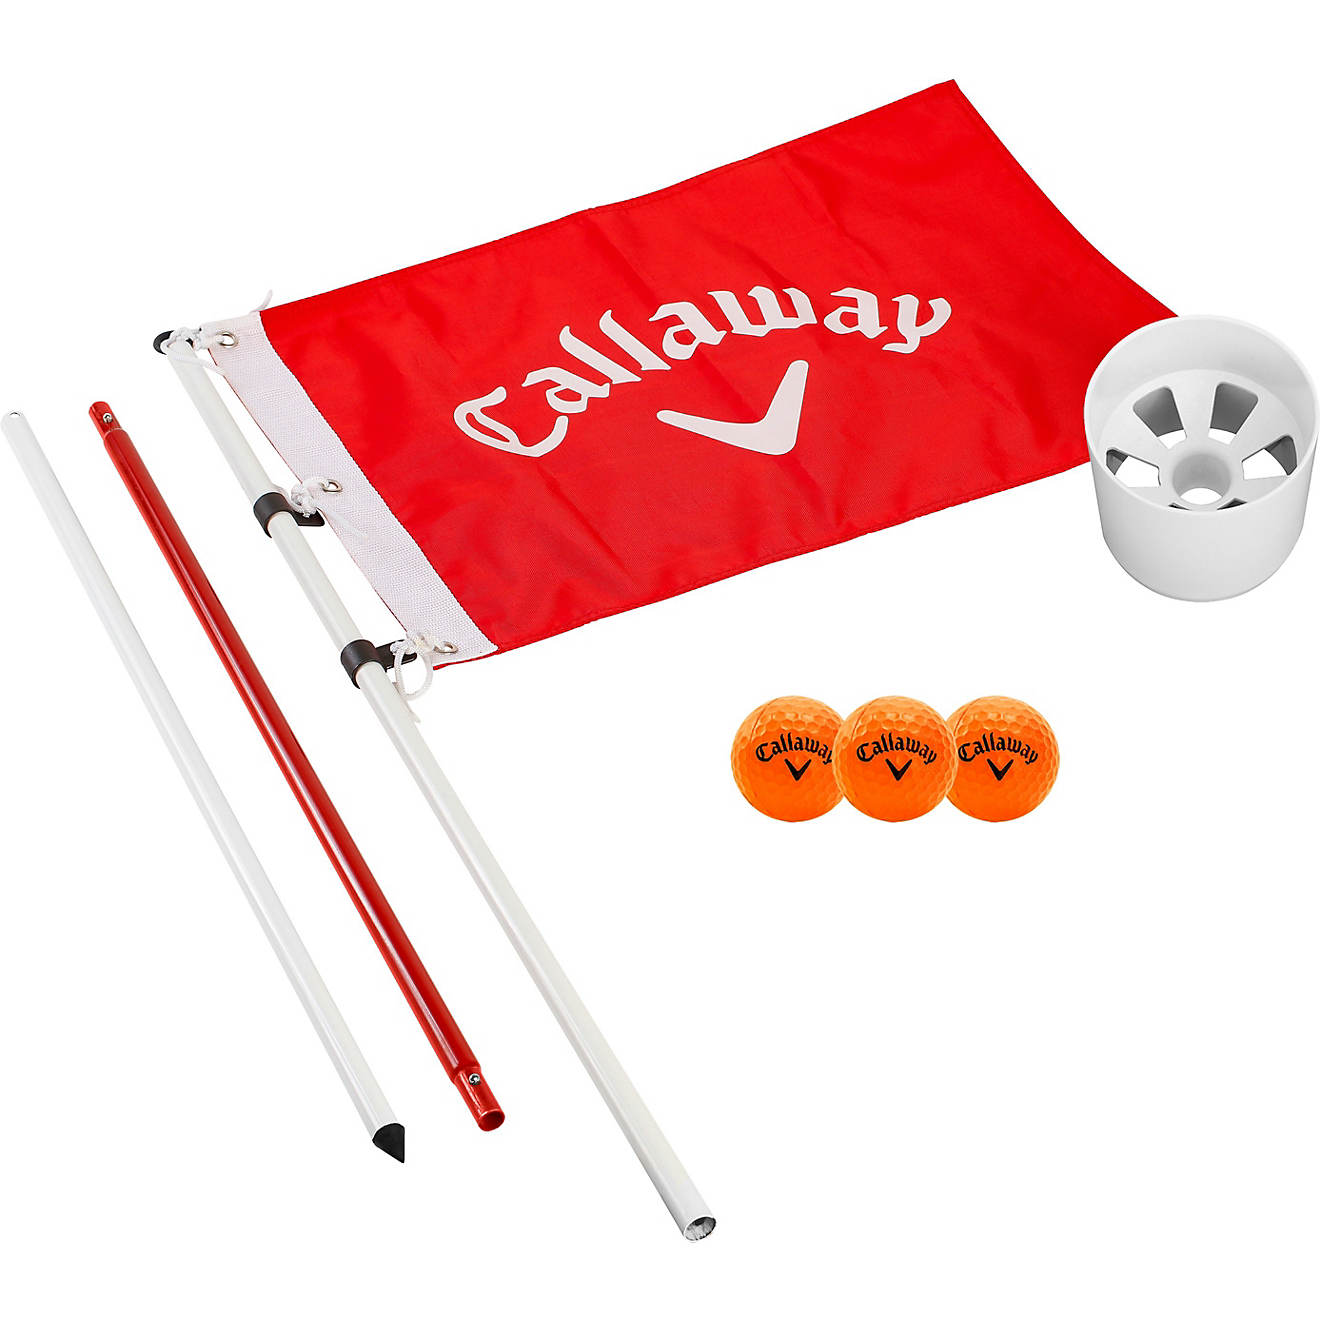 Callaway Closest to the Pin Game Flagpole and Cup Set                                                                            - view number 1